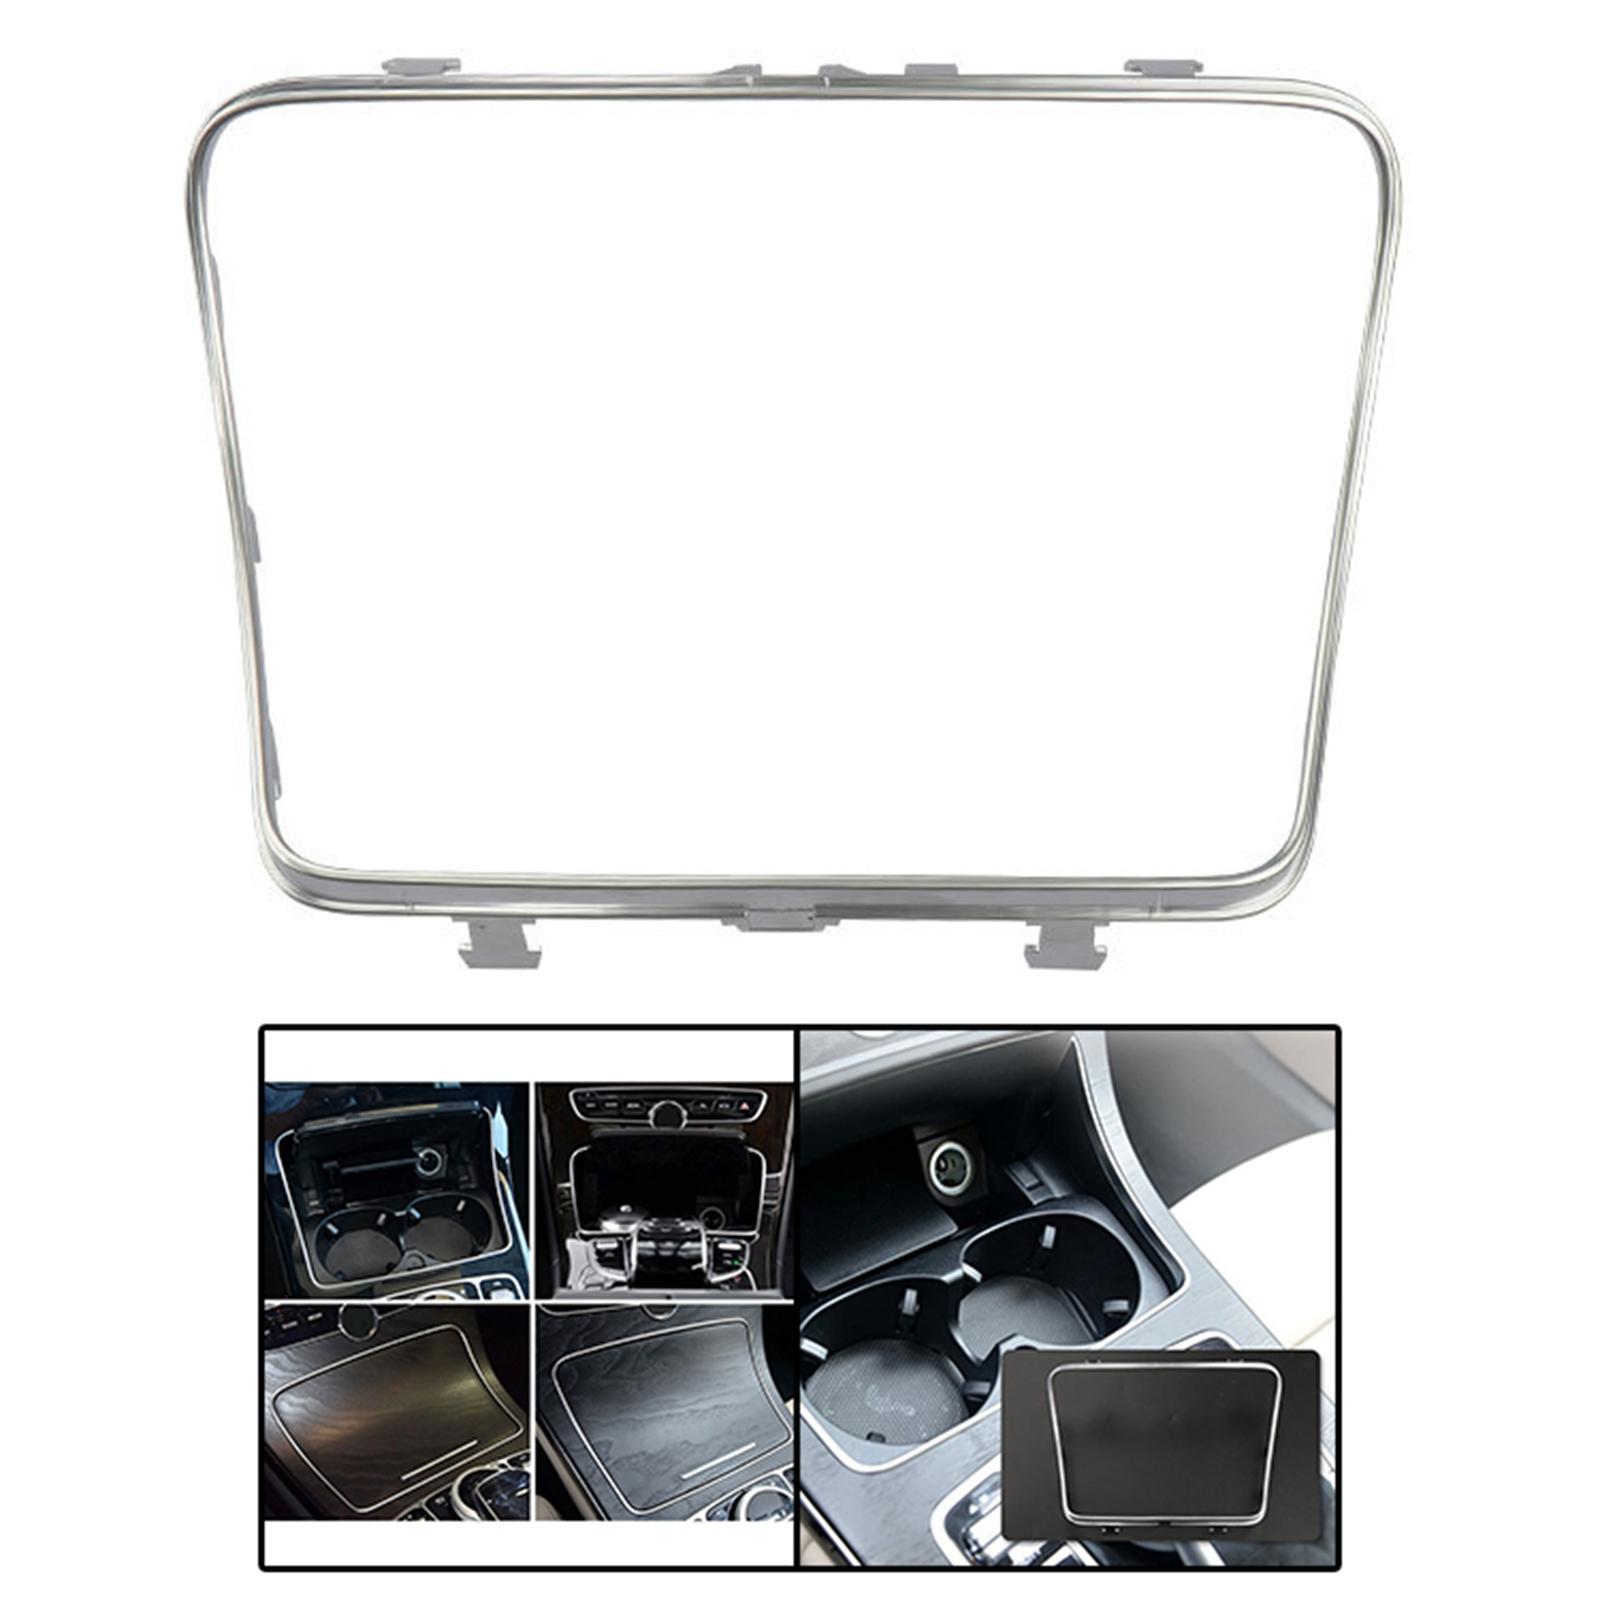 Console Cup Holder Strip Trim Frame Ashtray Trim Ring Stickers Fits for Mercedes C Class W205 GLC Class W205 2015-20 Moulding Trim Plating